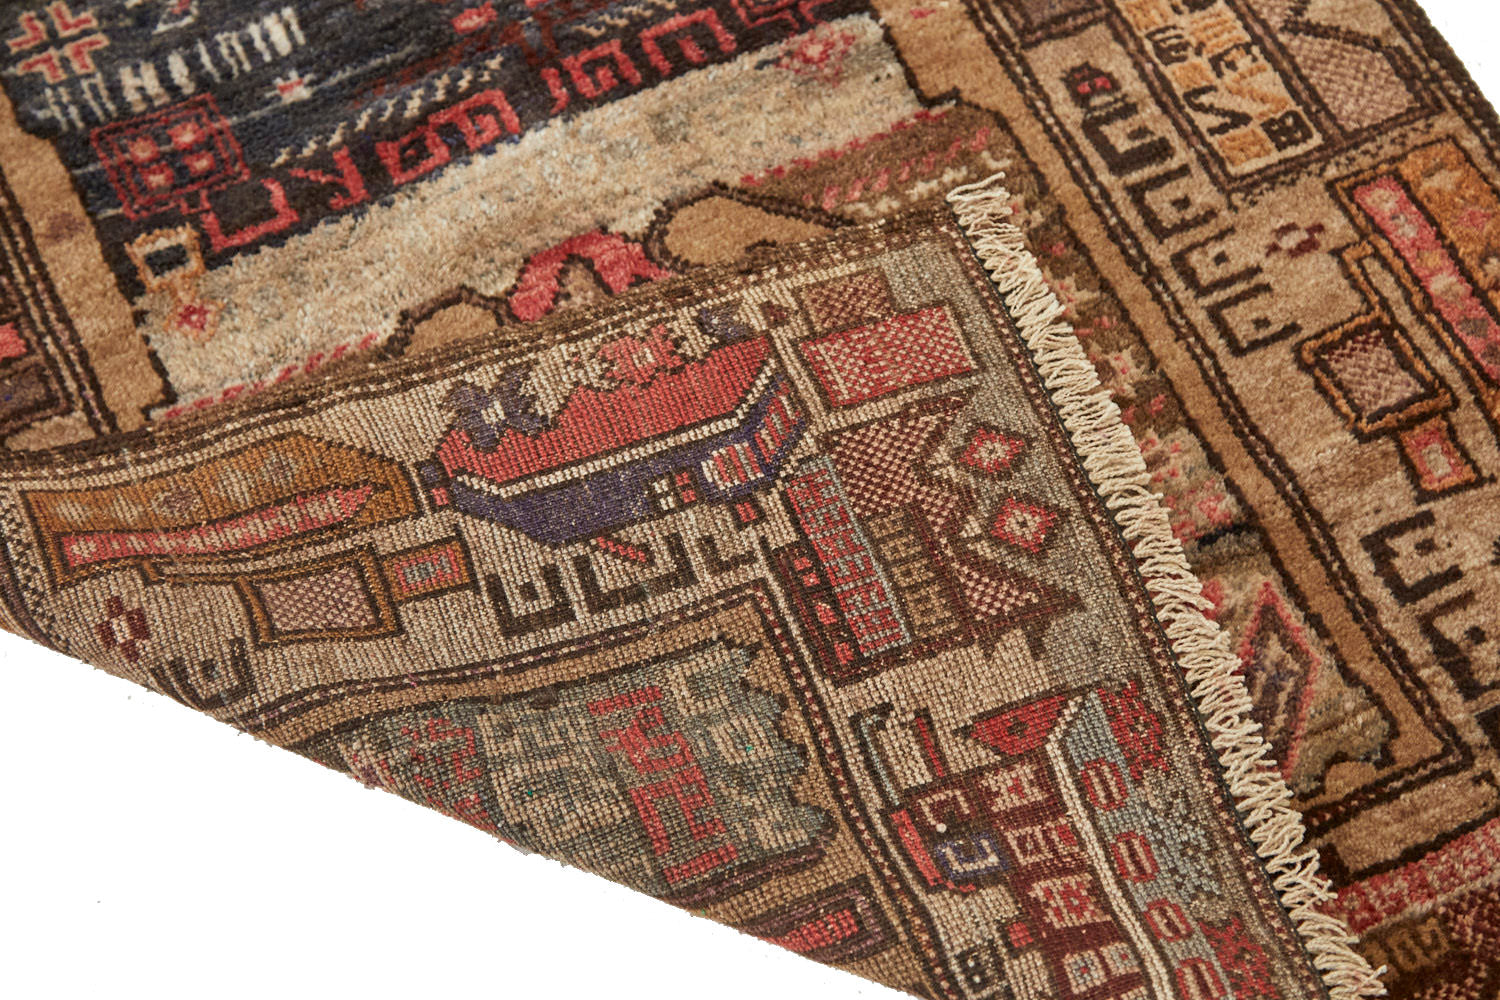 Front and back of vintage Afghan War Rug with earthy tones, tan base with brown and pink designs, beautiful details for office, kitchen or living room rug - Available from King Kennedy Rugs Los Angeles